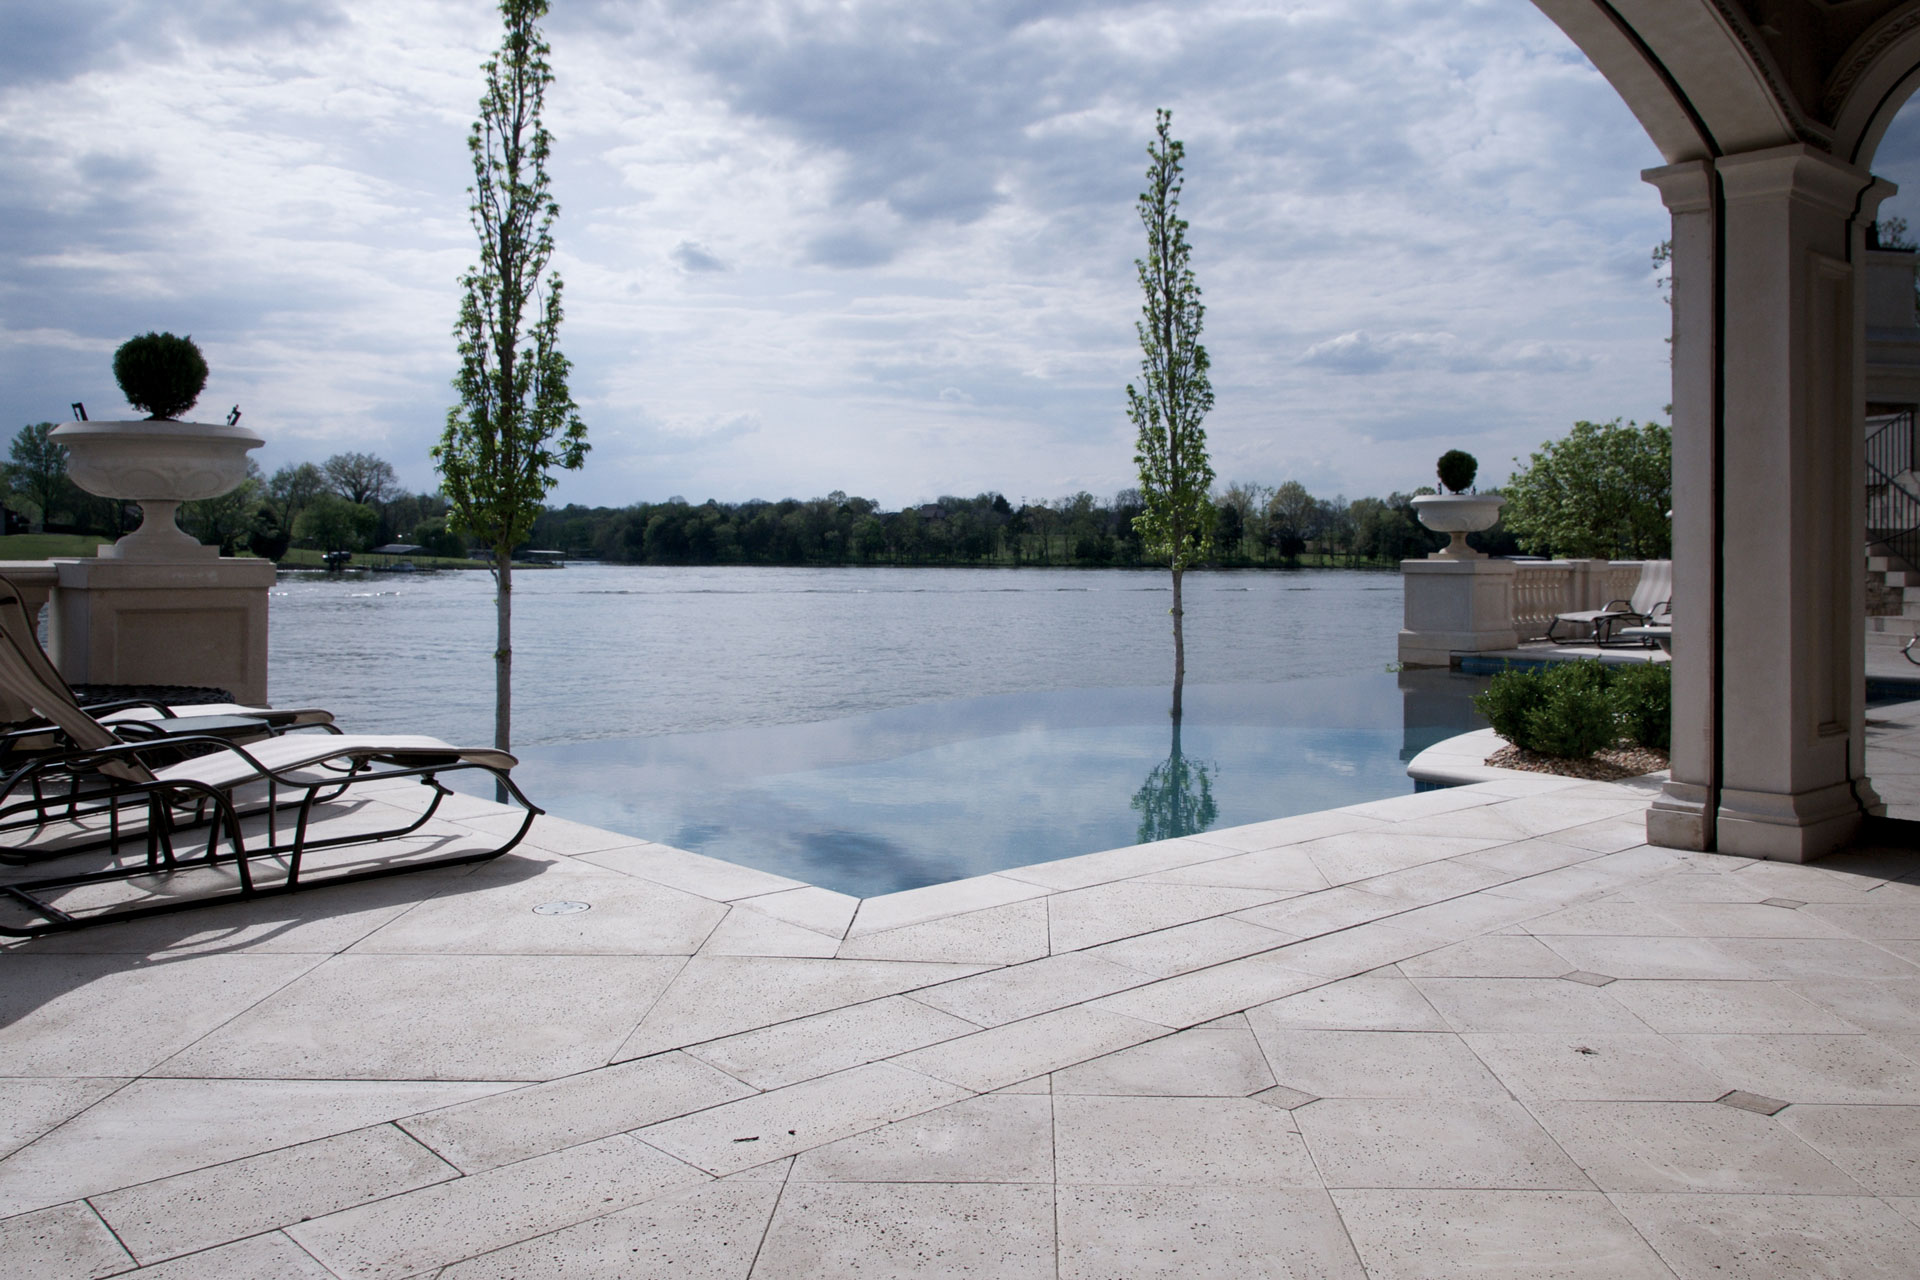 The pool deck pavers and other pavers around pool also extend to the natural lakeside